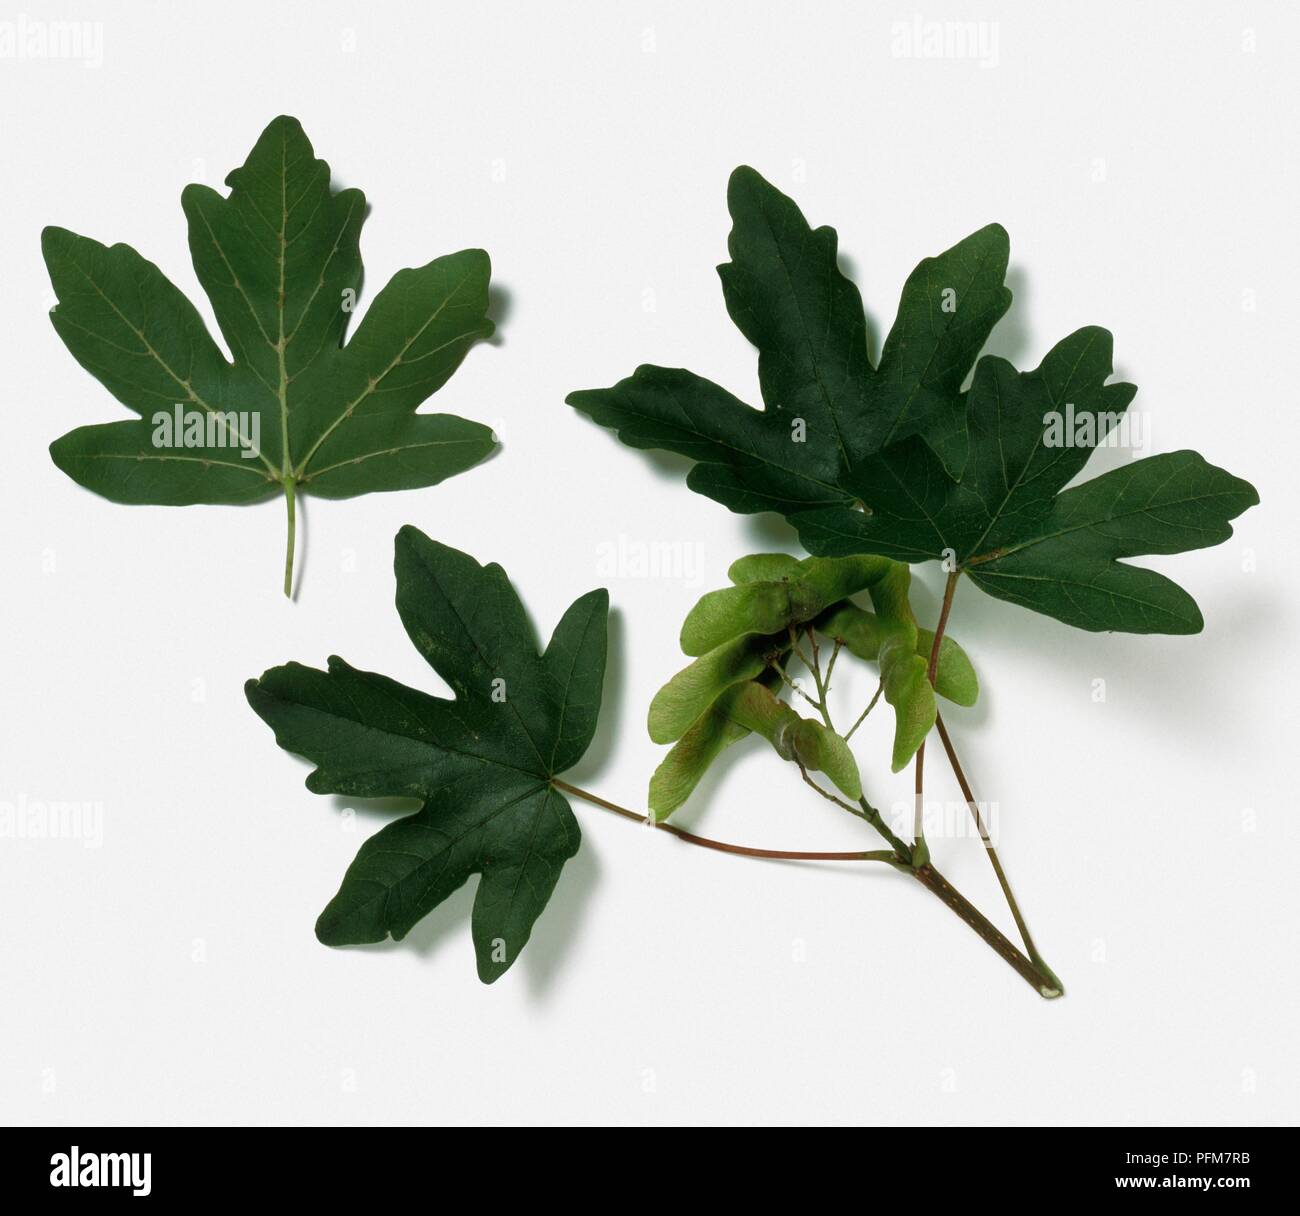 Lobed leaves from Acer campestre (Field maple) Stock Photo